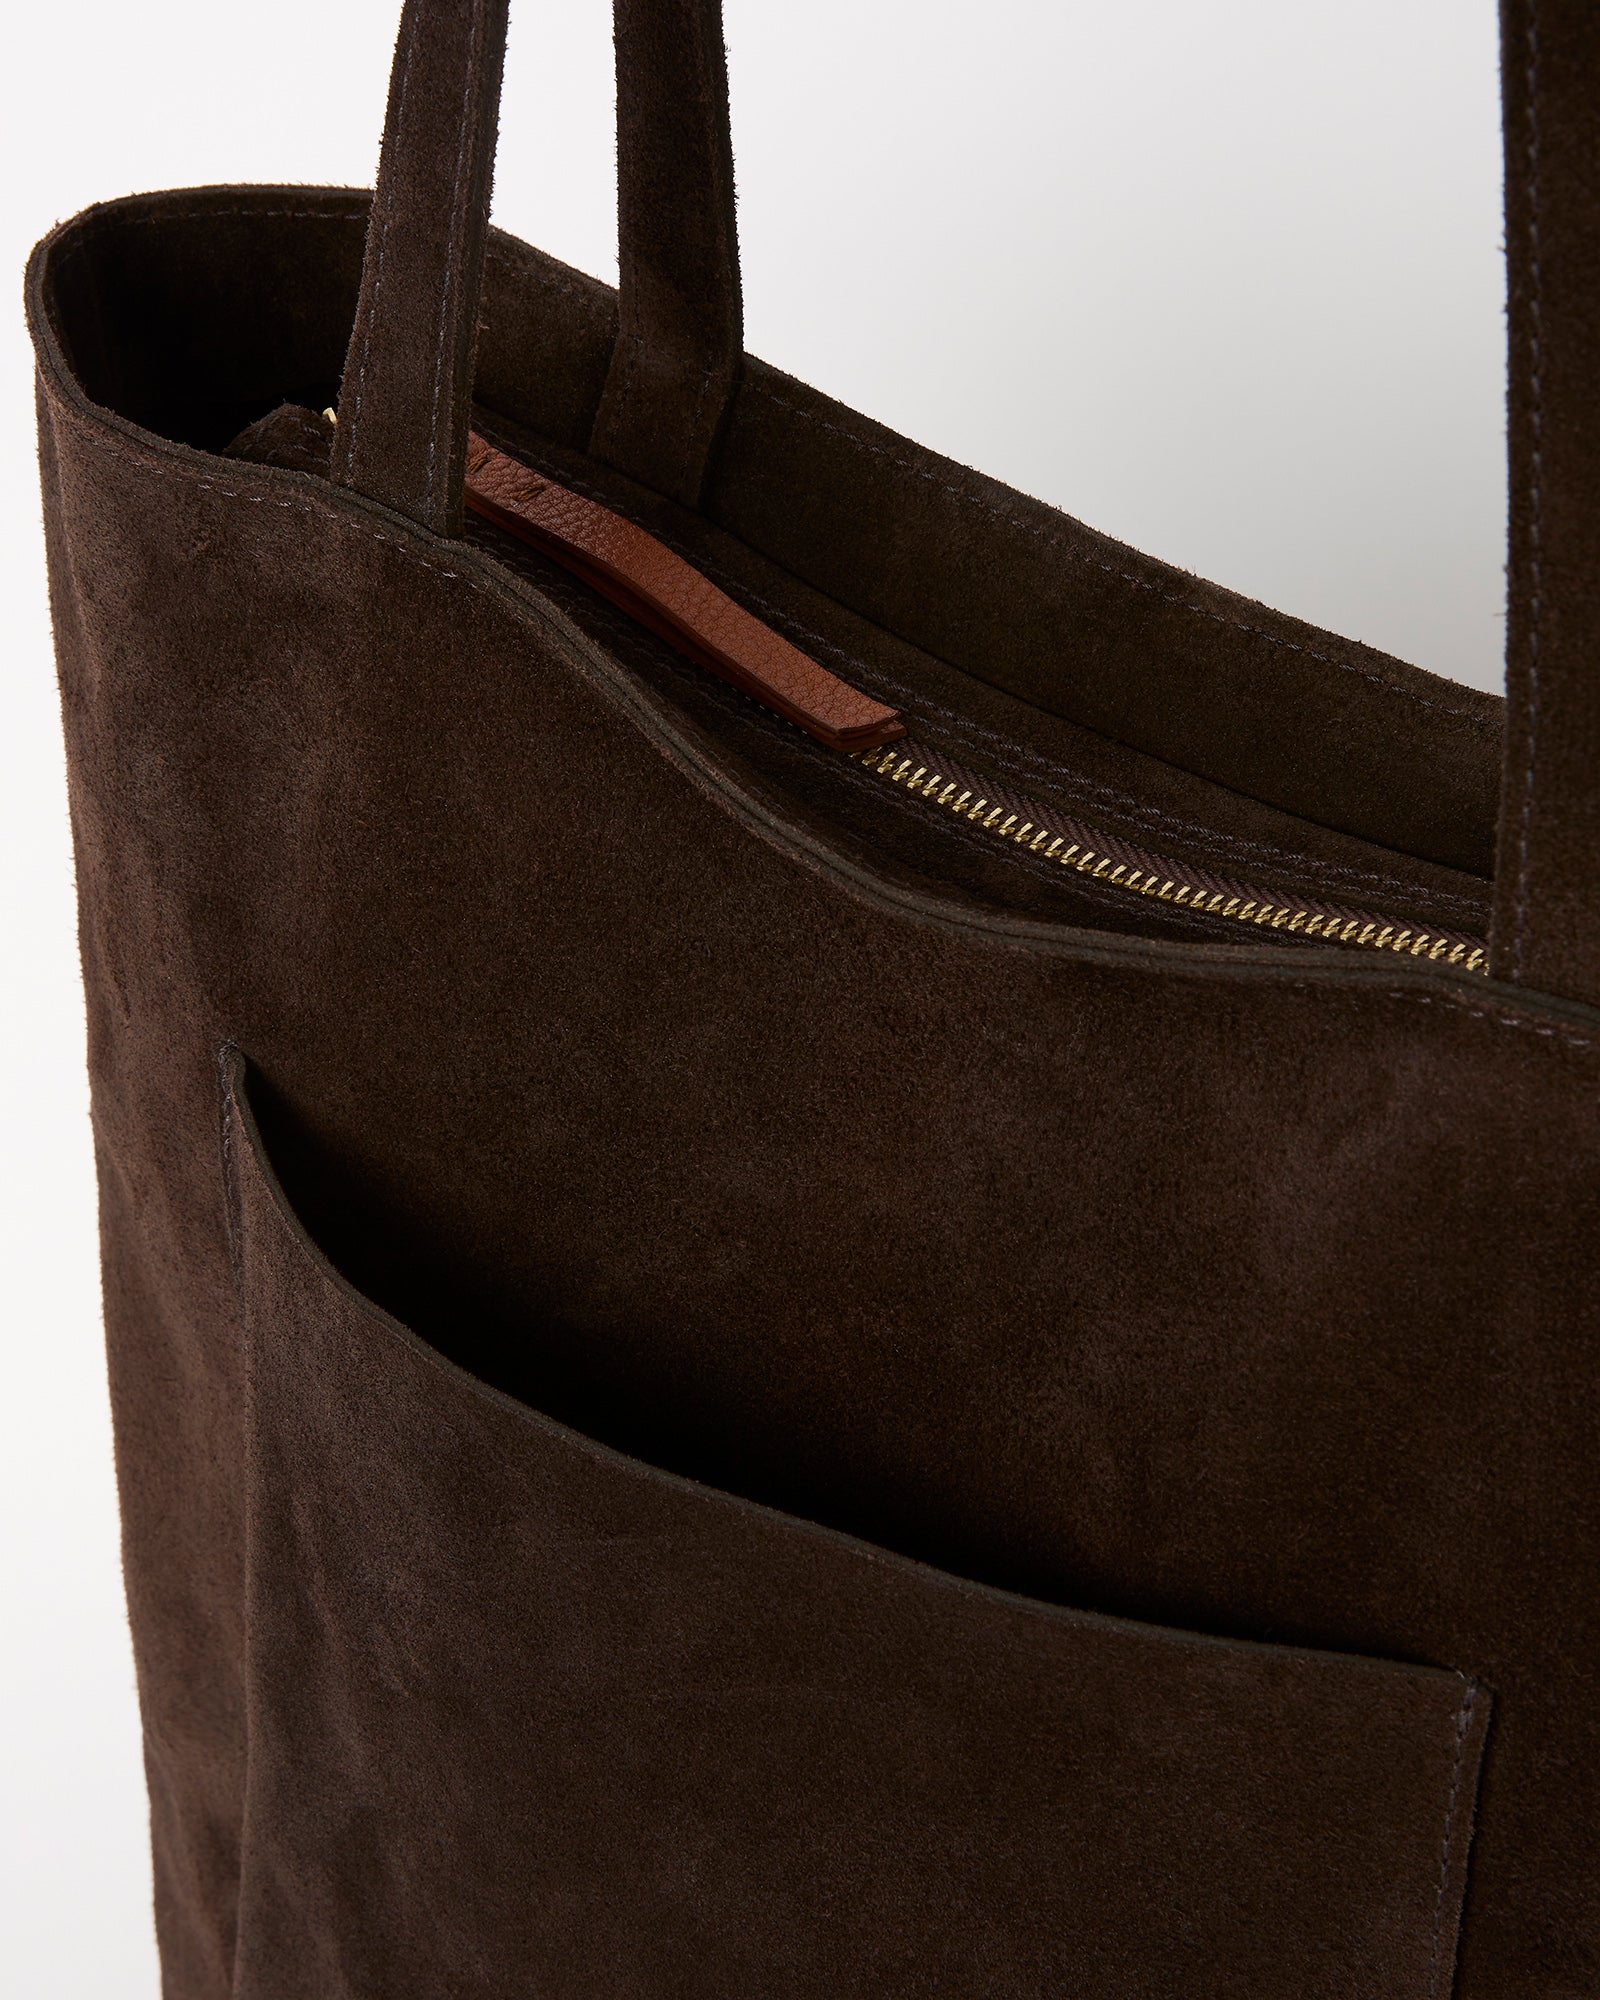 Suede Everyday Tote - Chocolate